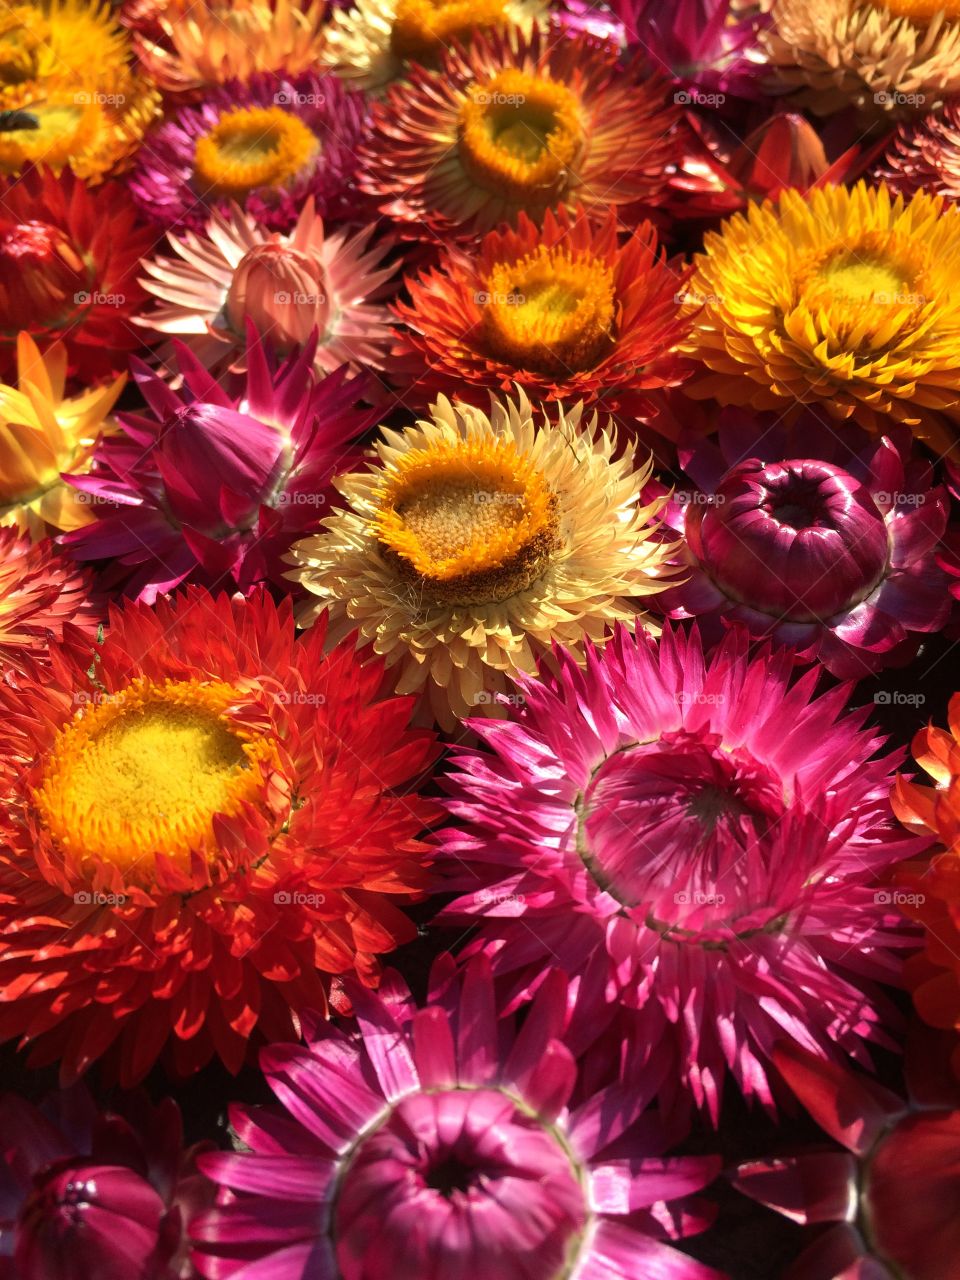 Multicolored flowers of the immortelle, collected together.